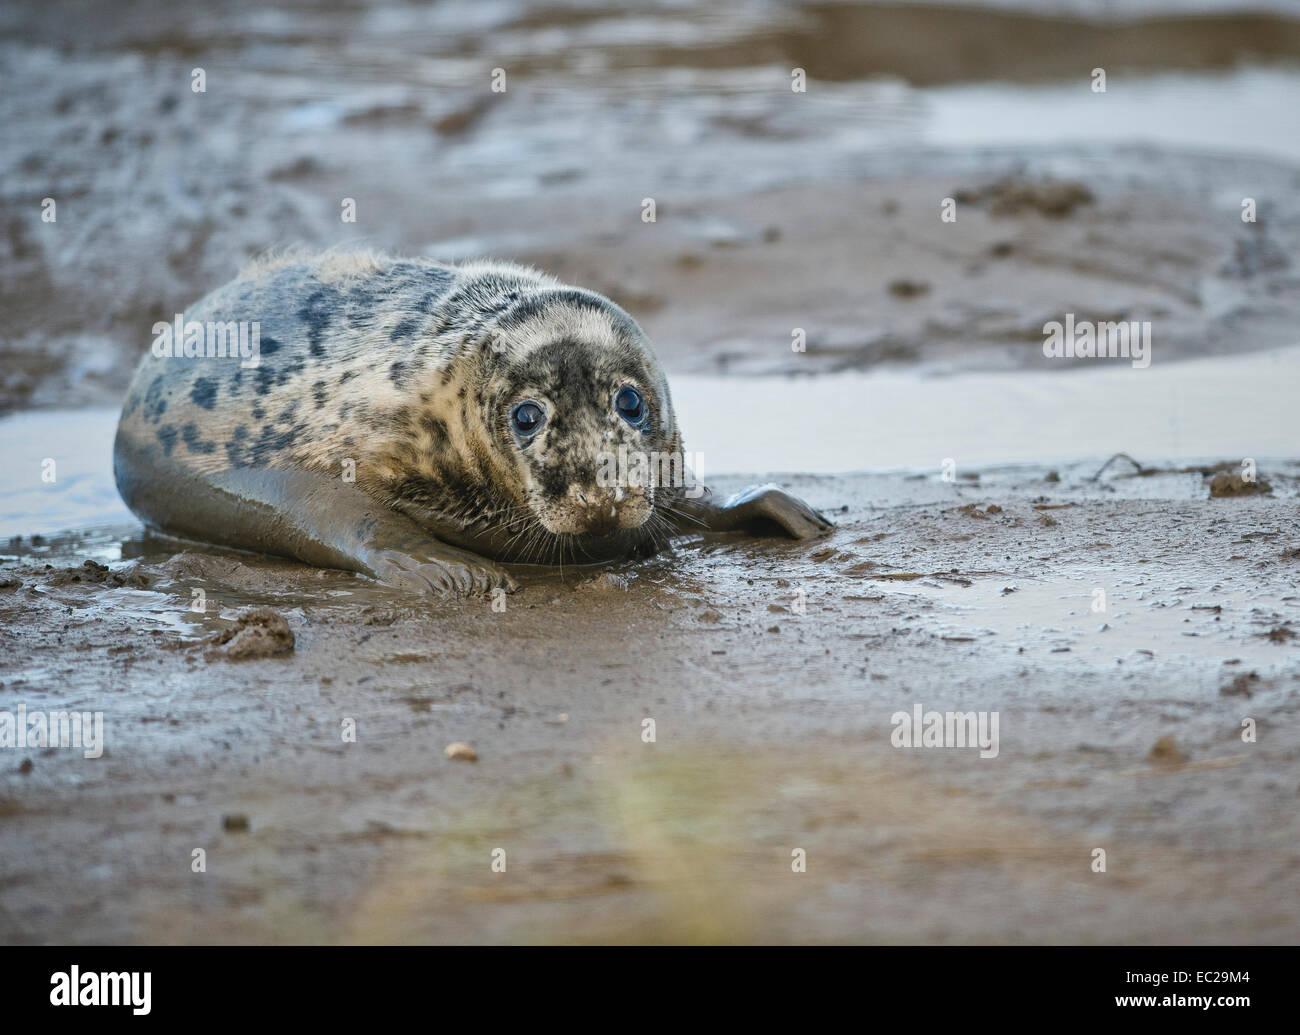 A young grey seal (Halichoerus grypus). Stock Photo